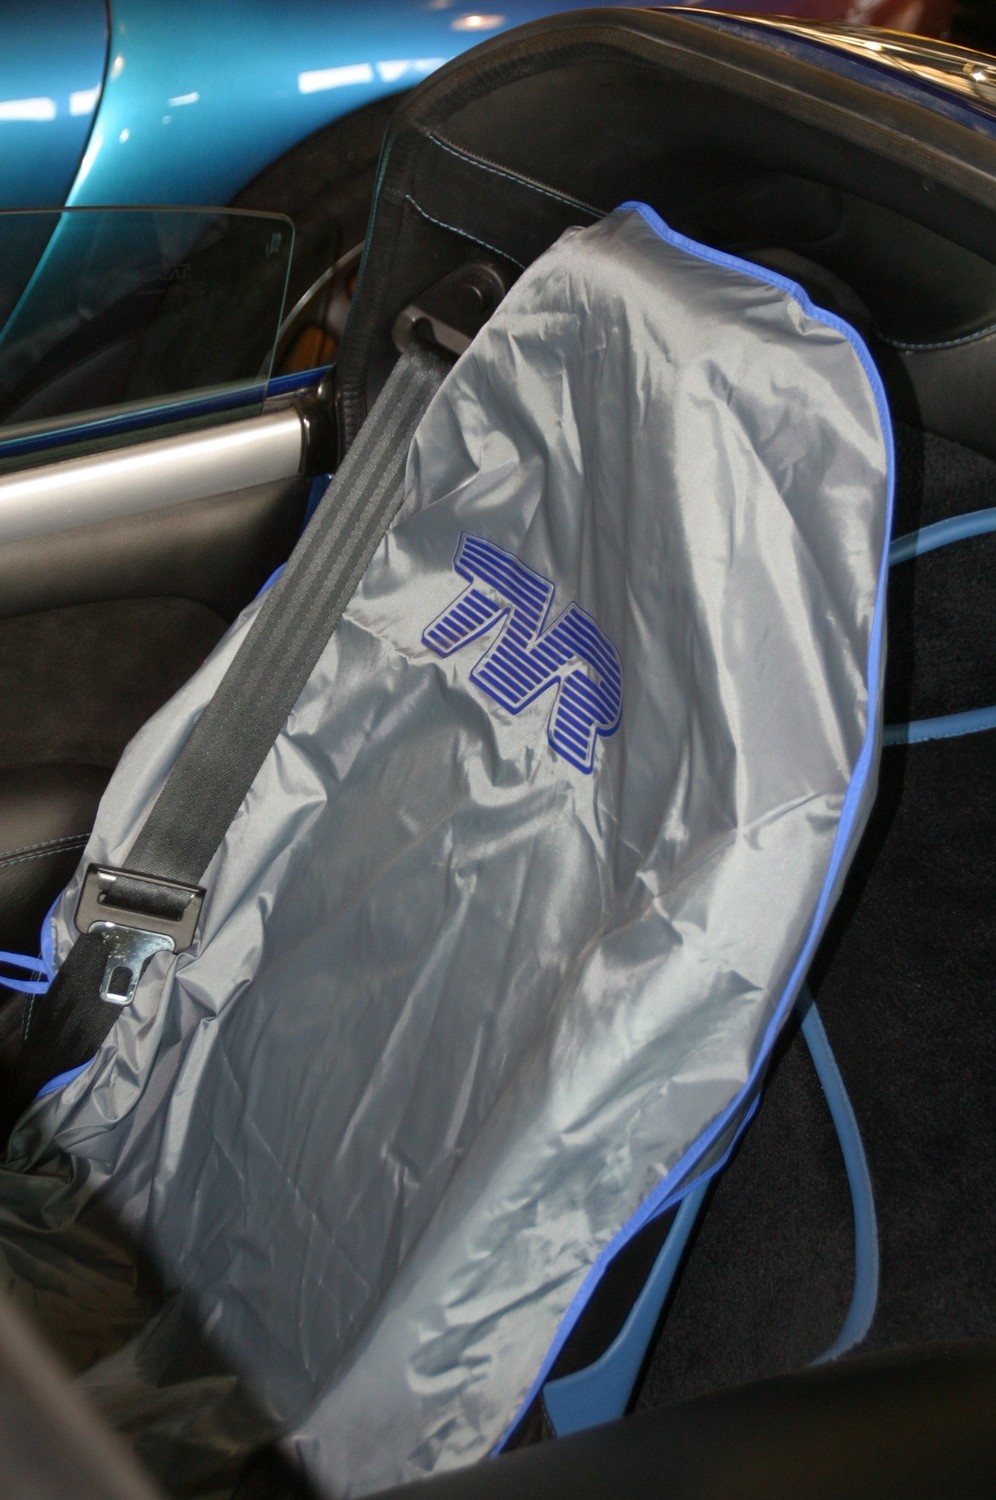 TVR Seat Cover in silver/blue